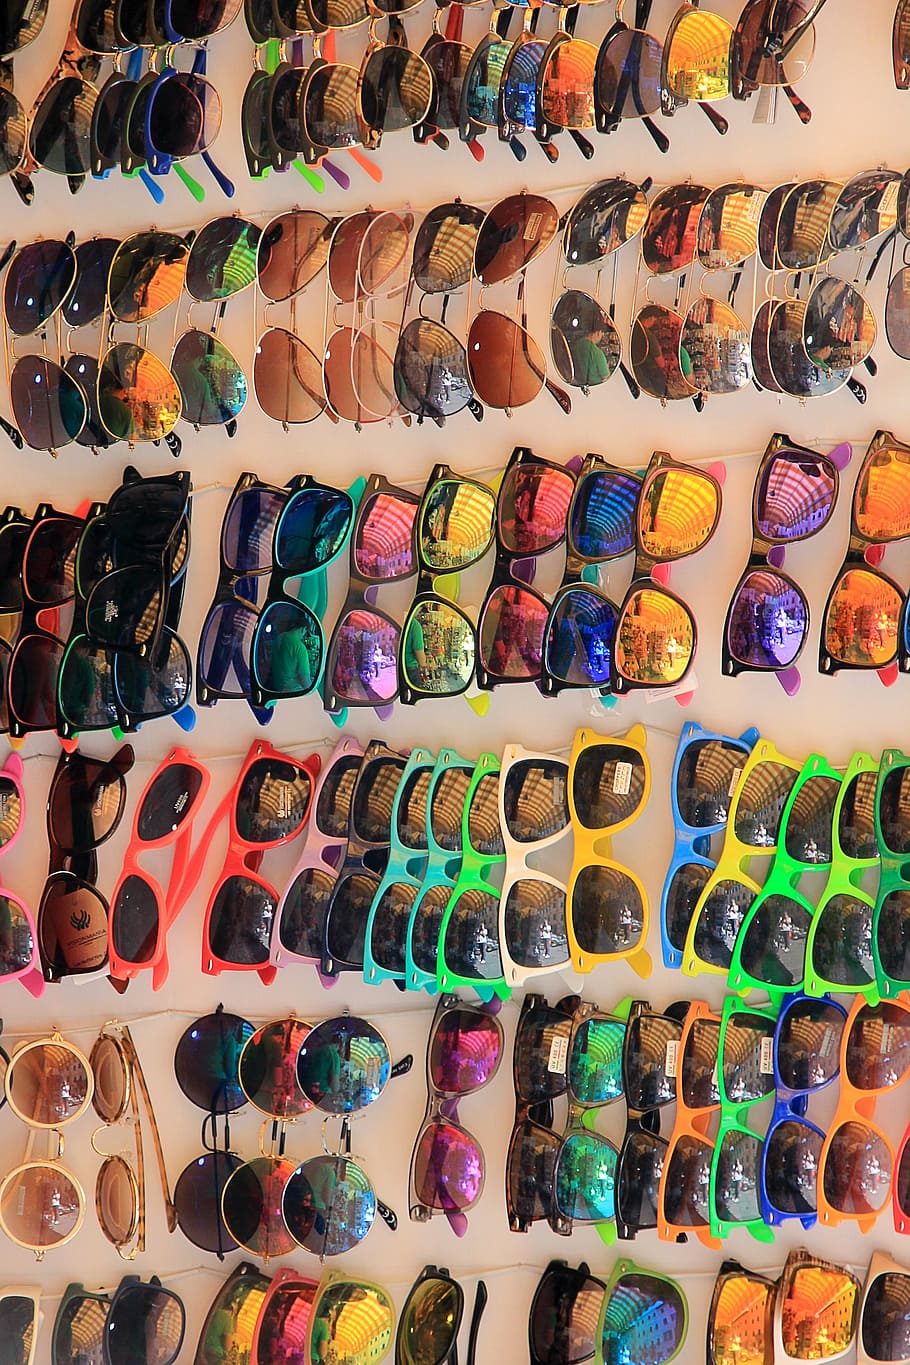 sunglasses, colorful, souvenir, display stand, business, glasses stand, mirror, large group of objects, choice, multi colored